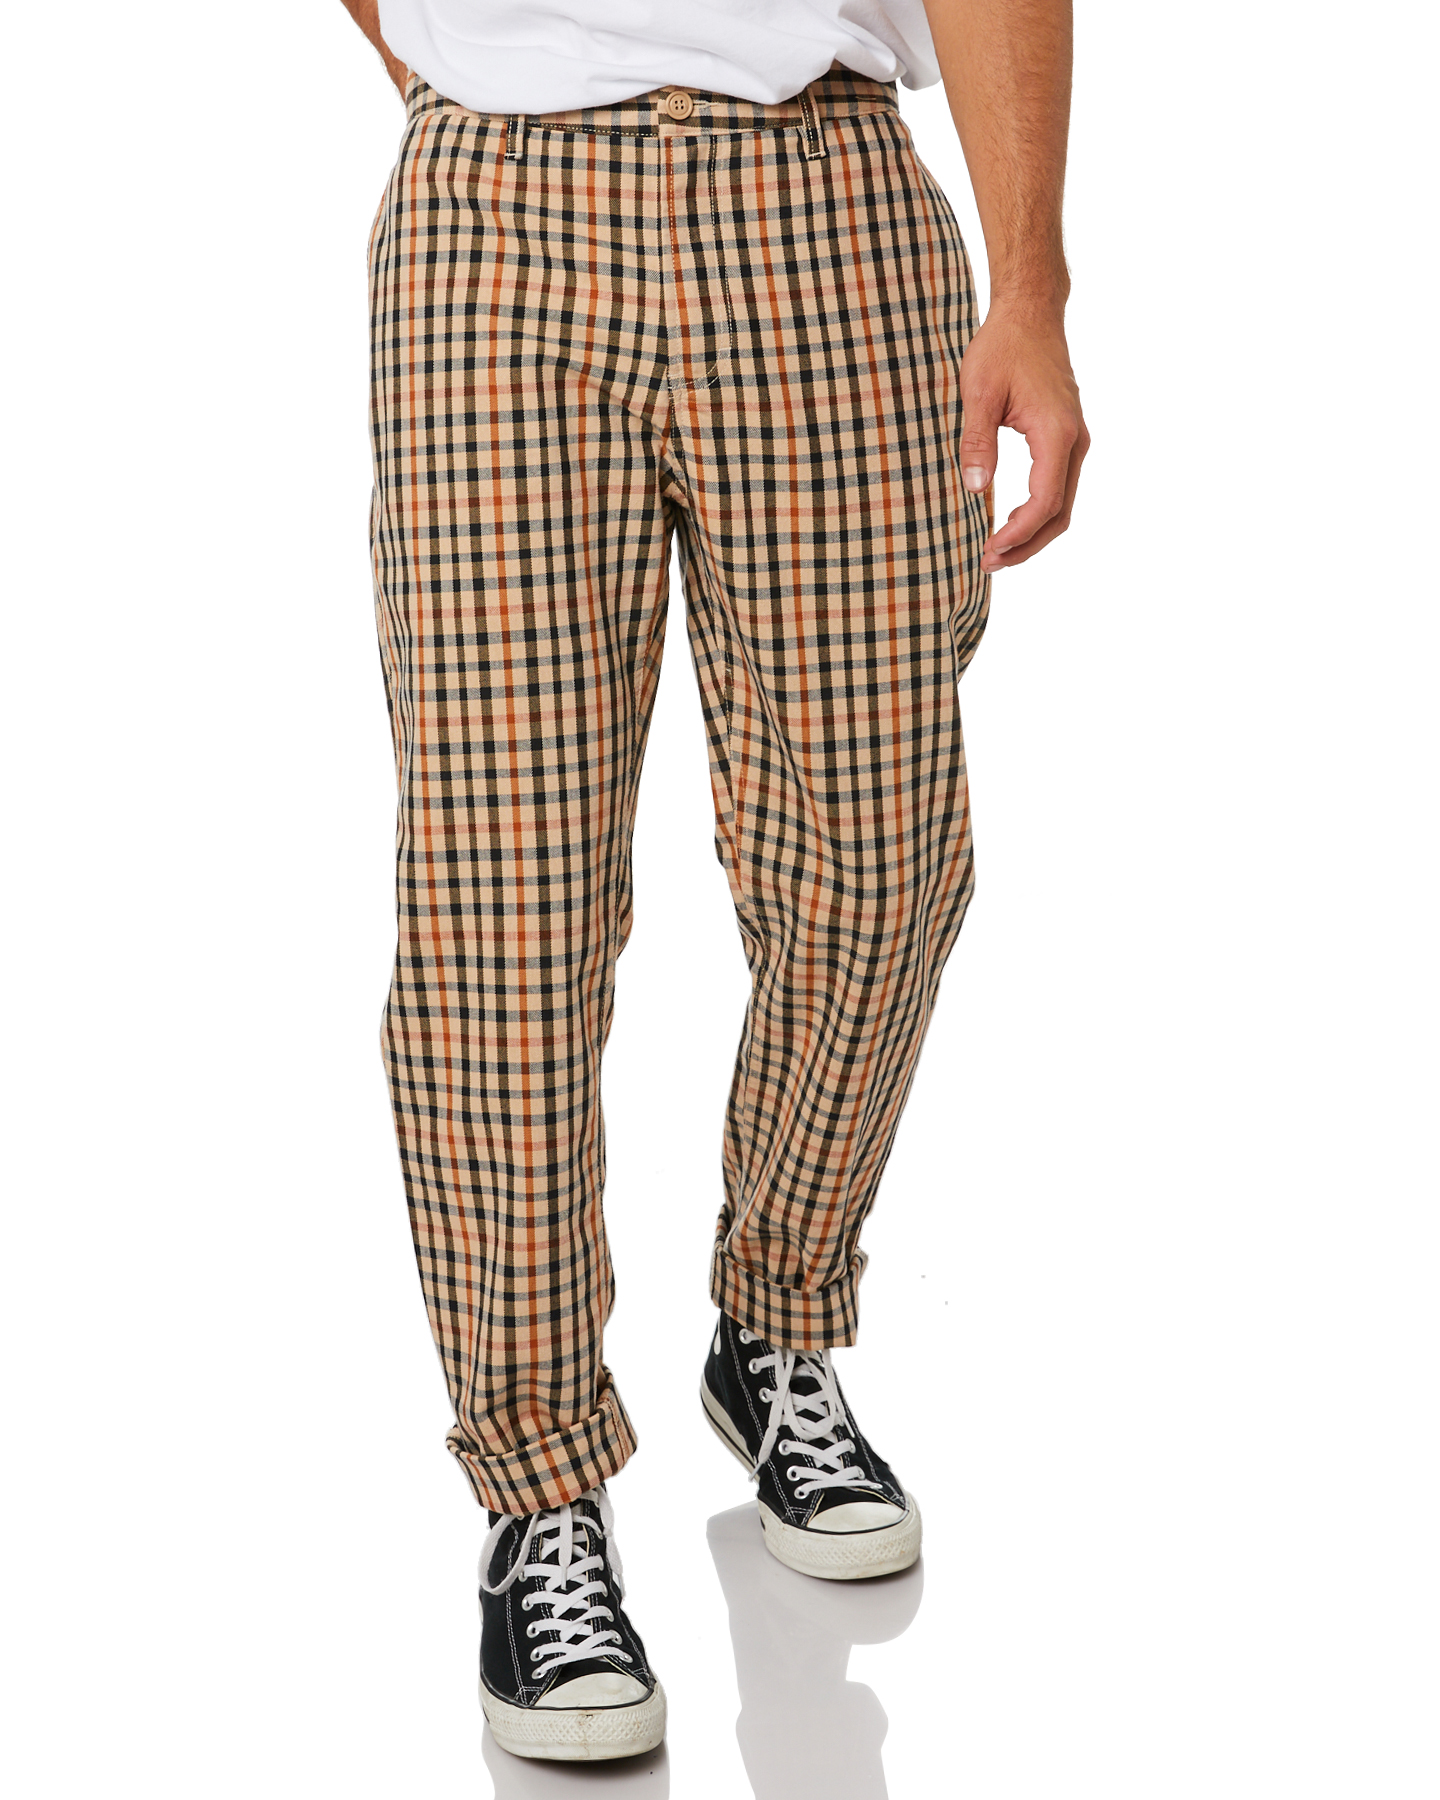 Barney Cools B Relaxed Mens Chino Pant - Beige Check | SurfStitch